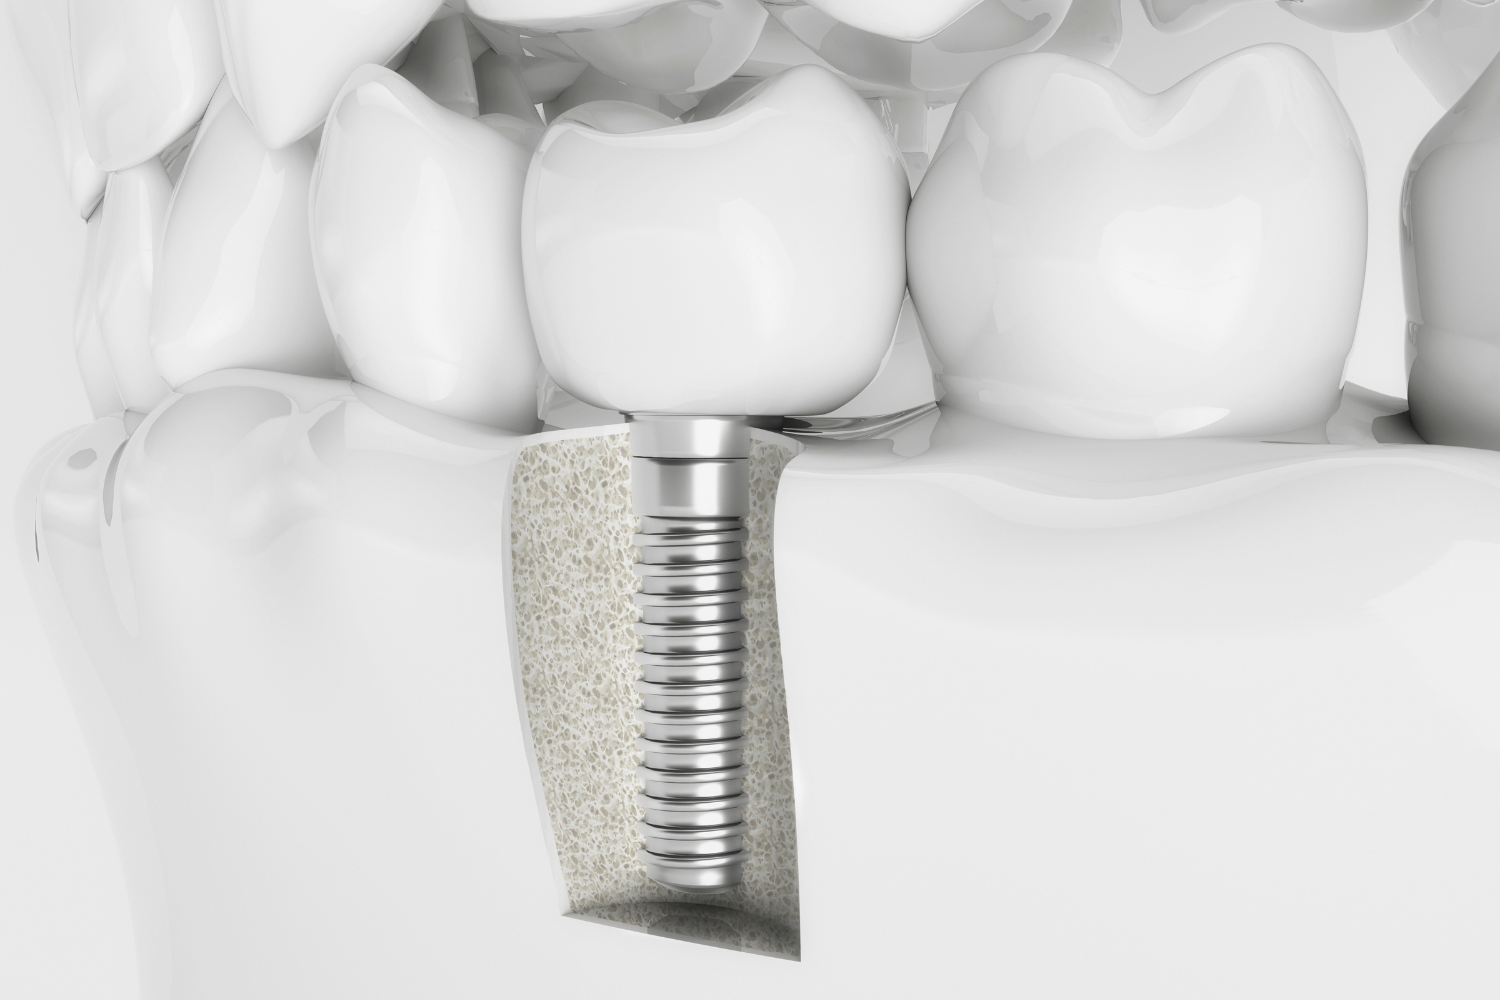 Dental Implants Need To Know